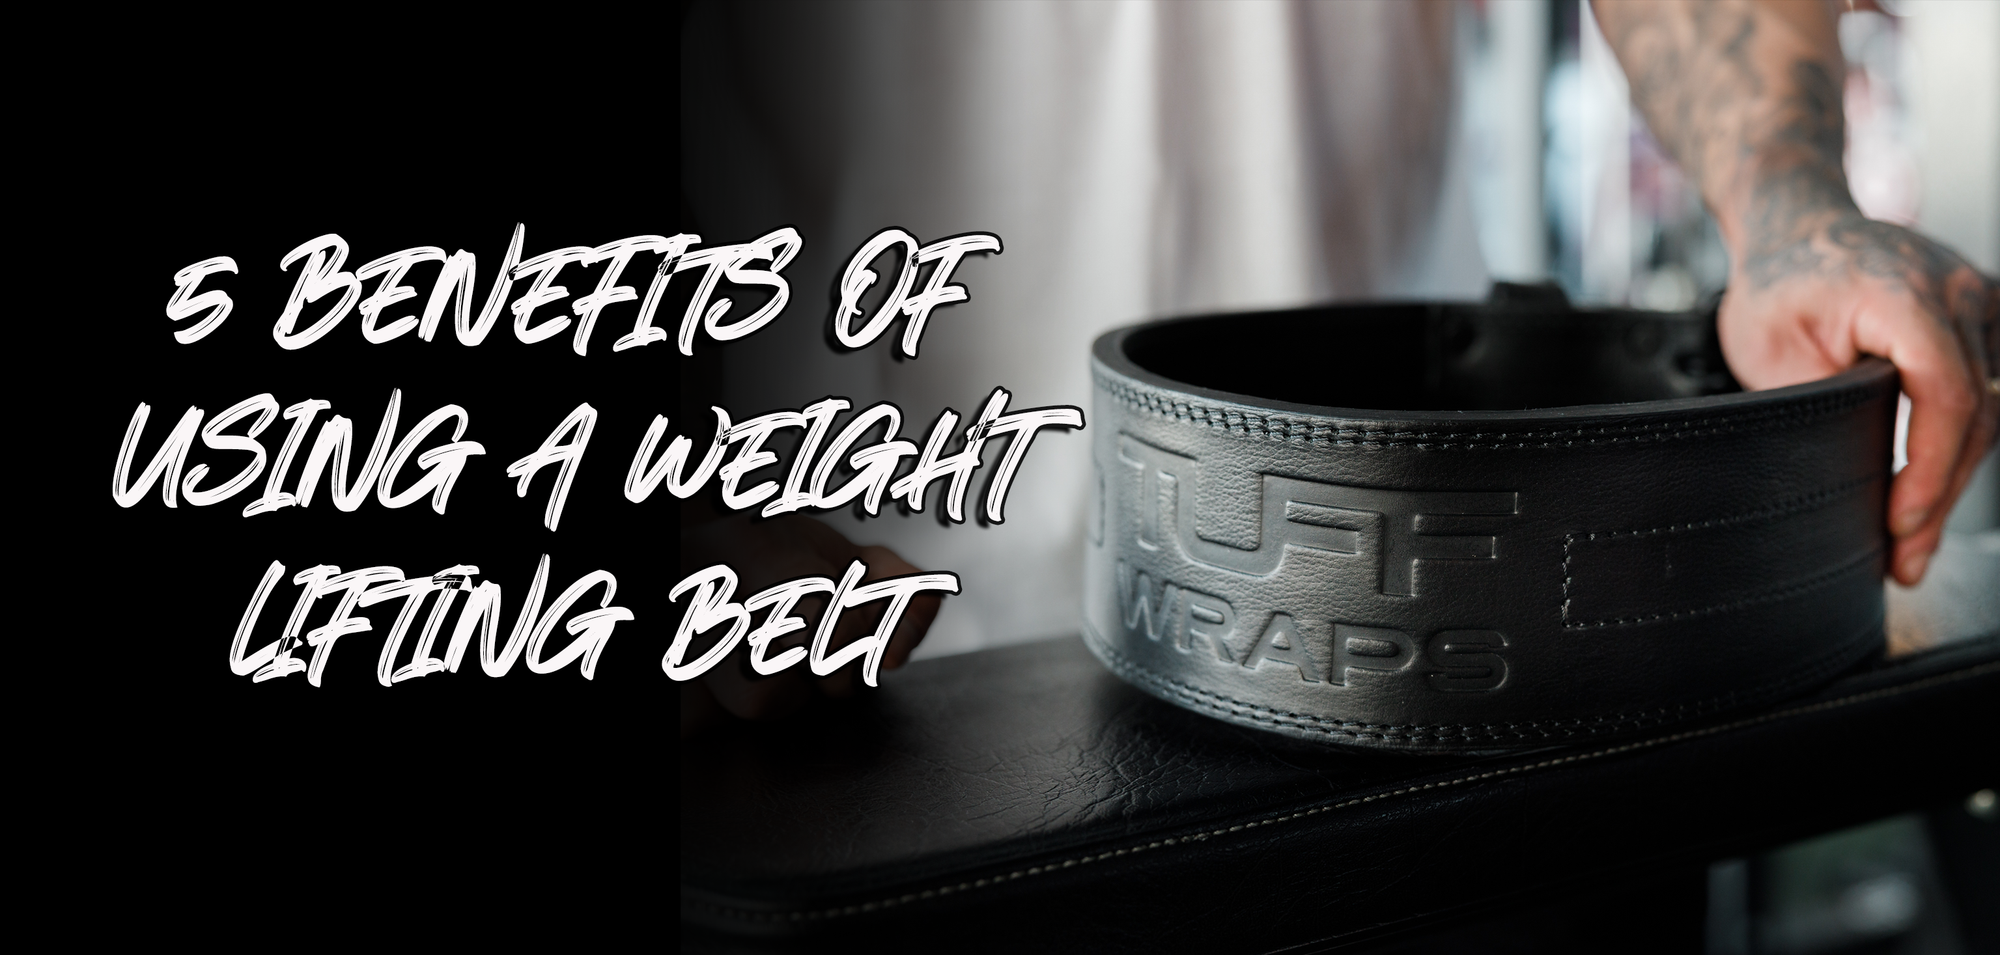 5 Benefits Of Using A Weight Lifting Belt